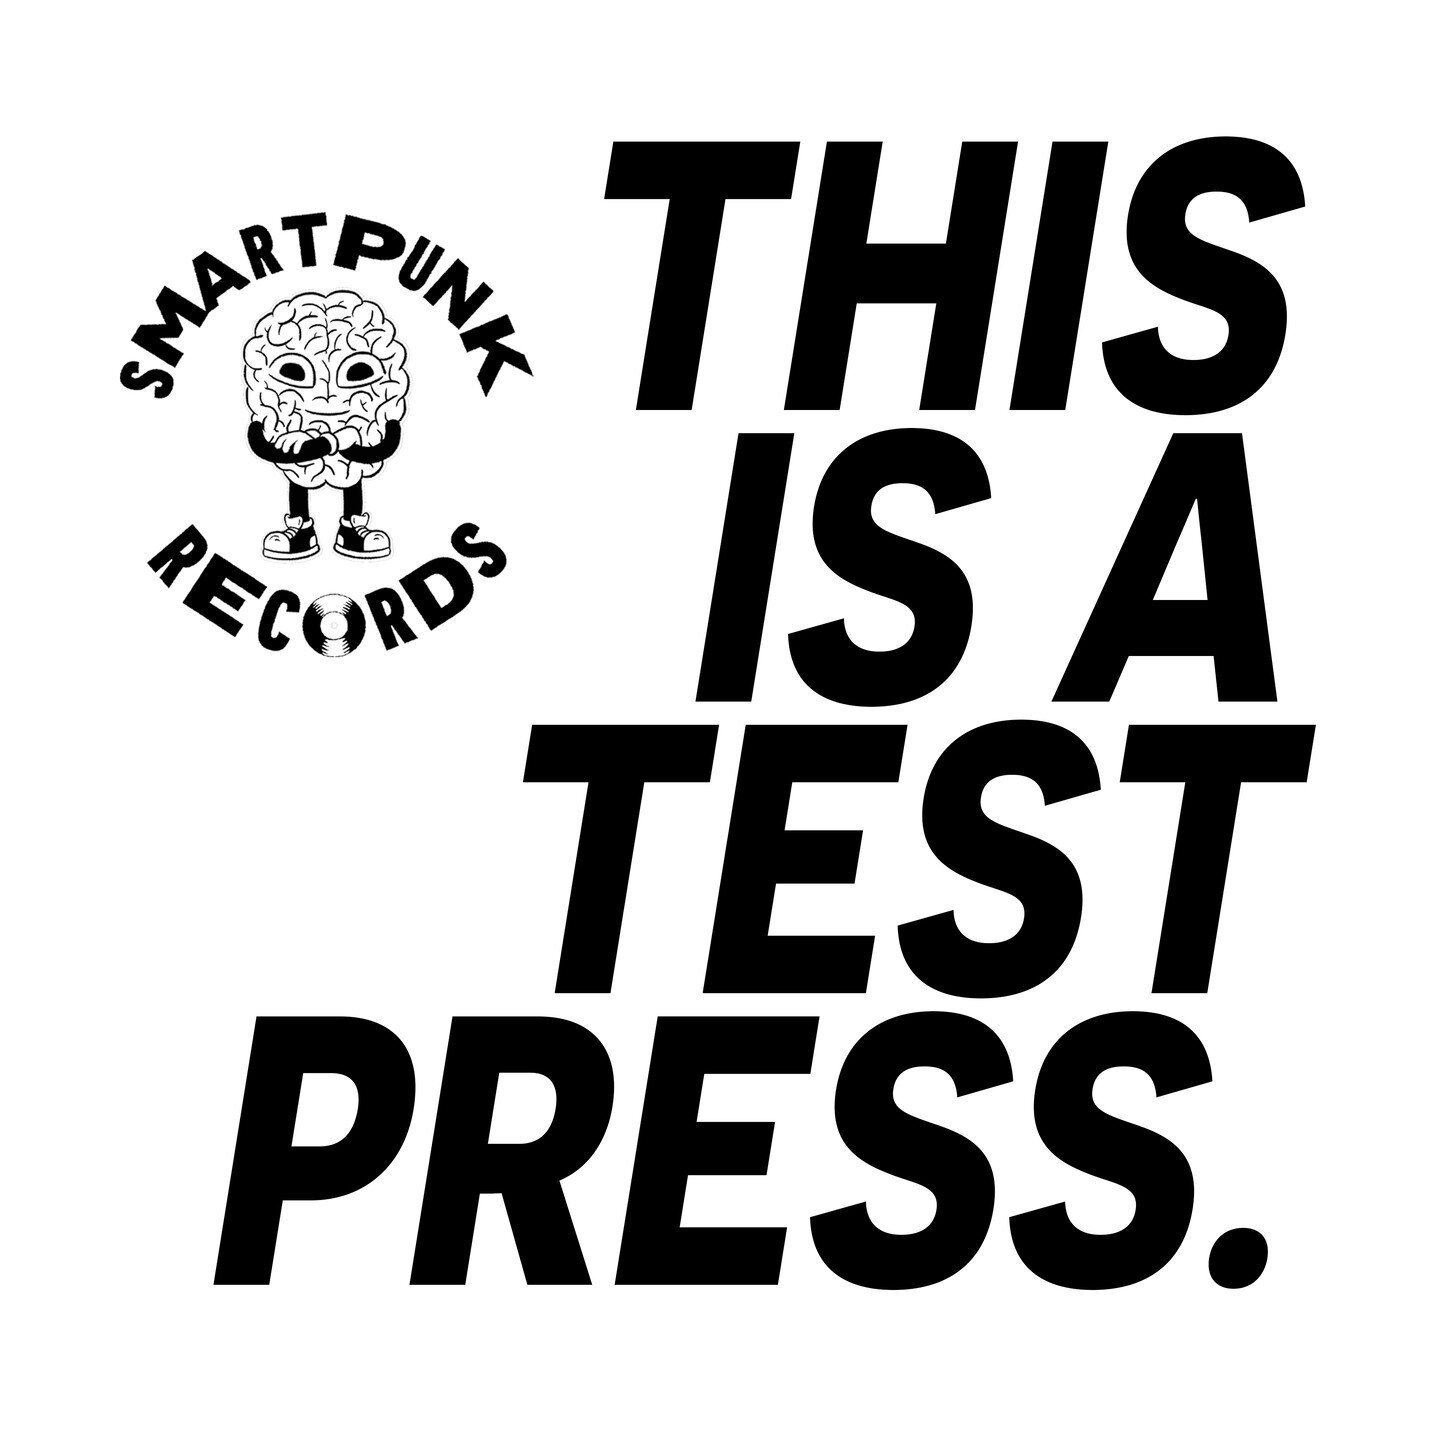 Test presses are live now. Mostly just one of each title, but some I was able to snag two or three. Limit one per person. If you try to buy more than one, we'll cancel your order. I make the rules. 🖕😘🖕

SmartpunkShop.com